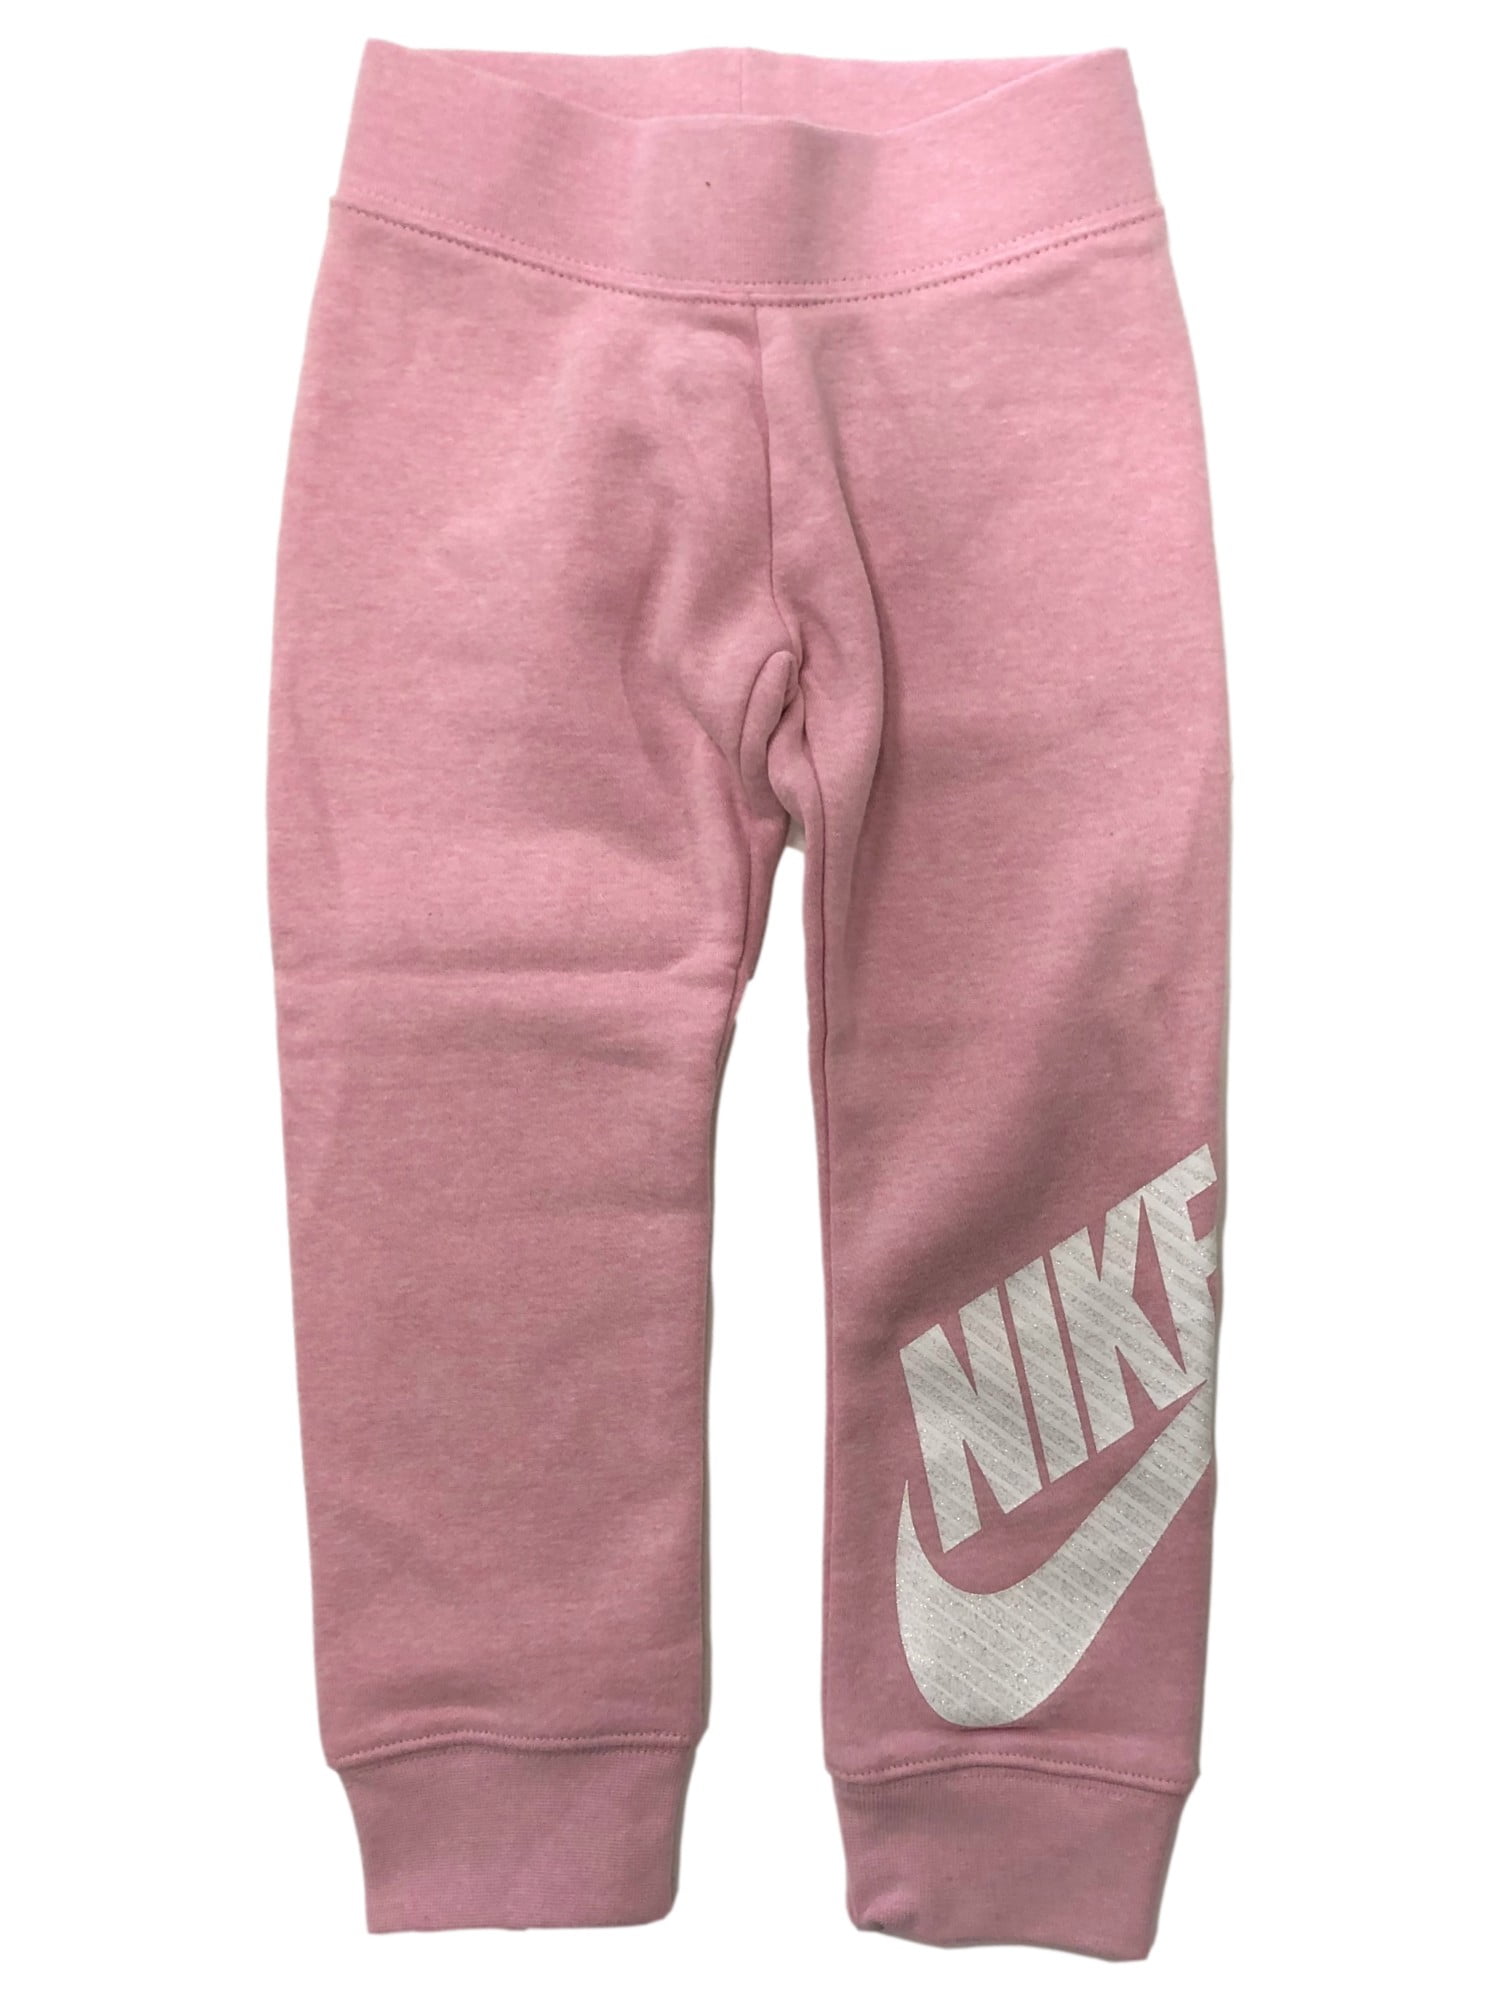 forma Panorama Picante Nike Girls Pink Athletic Joggers Stretch Sweat Pants 4 - Walmart.com